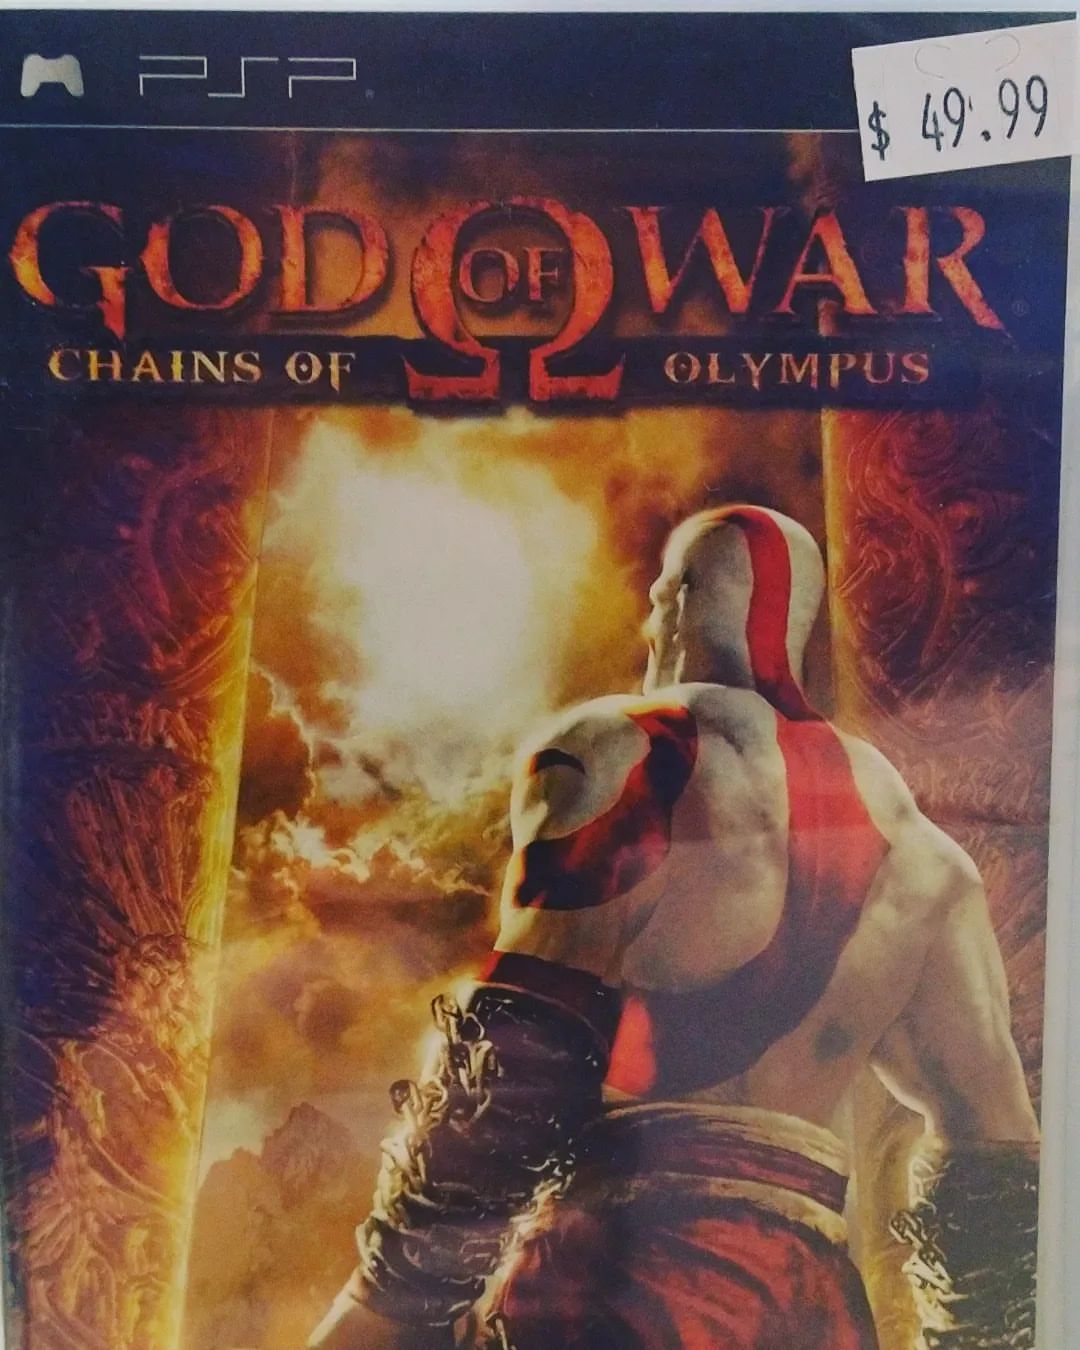 SEALED God of War Chains of Olympus available today! Why wait for Ragnarok when you can play a new old adventure with Kratos today?

#hudsonsvideogames #hudsonsvideogamesoviedo #psp #sony #godofwar #chainsofolympus #playstation #ps4 #ps5 #gow #godofwarragnarok #videogames #retrogames  (at Oviedo Mall)
https://www.instagram.com/p/ChARKp7u4S-/?igshid=NGJjMDIxMWI=